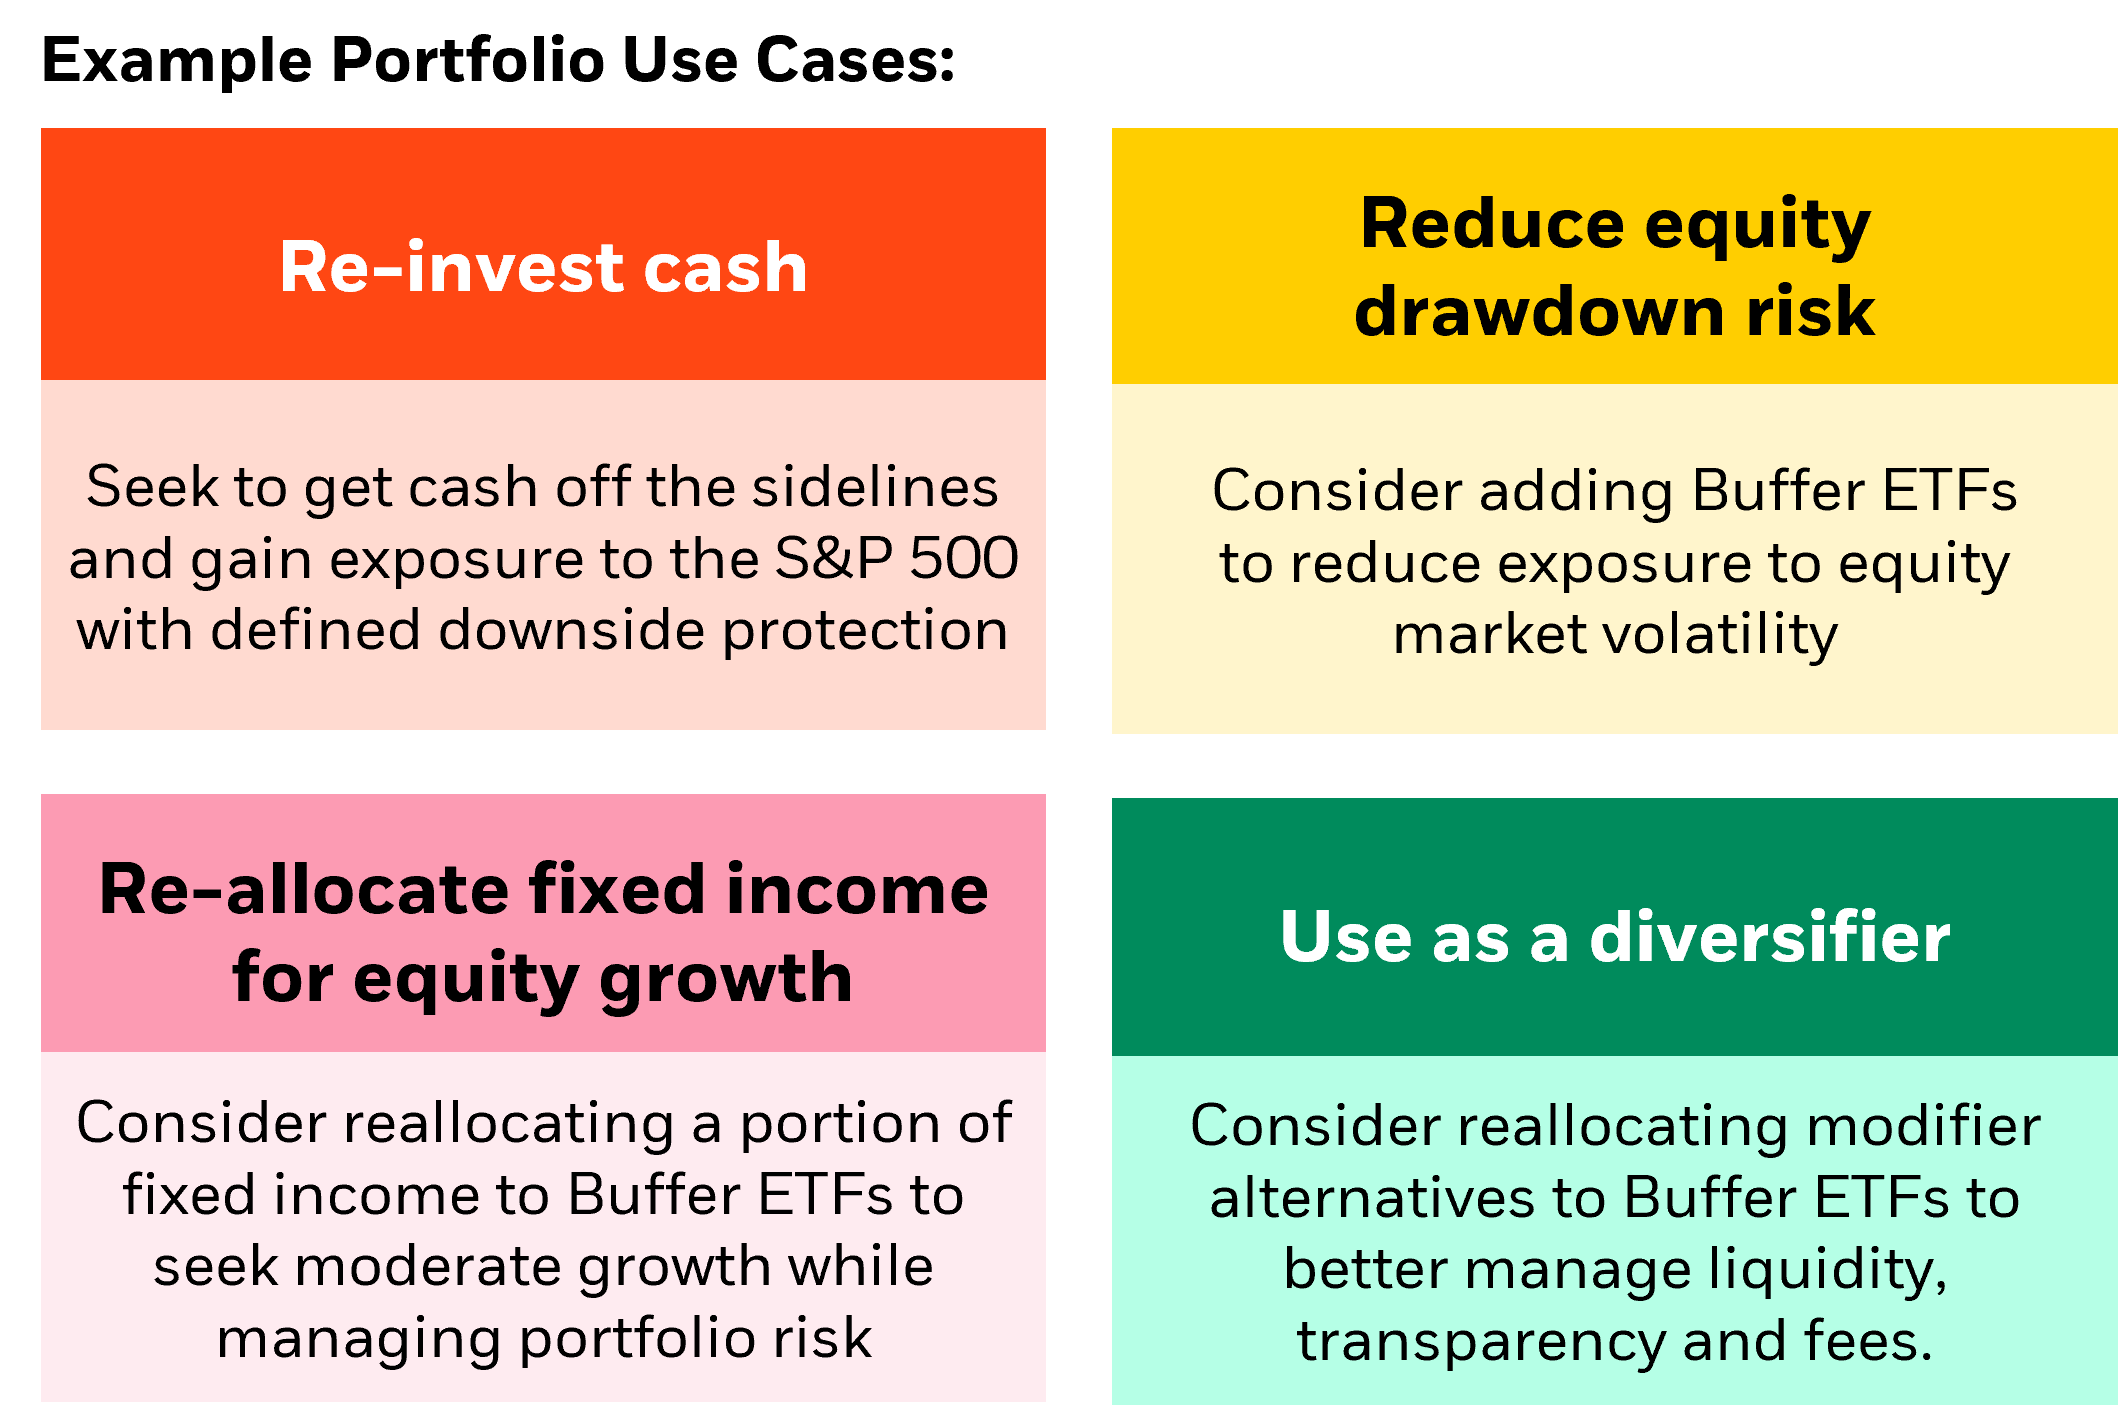 This graphic outlines the four main applications of Buffer ETFs in portfolio management. They can be utilized to reinvest cash, mitigate equity drawdown risks, reallocate fixed income for equity growth, and serve as an alternative investment option.